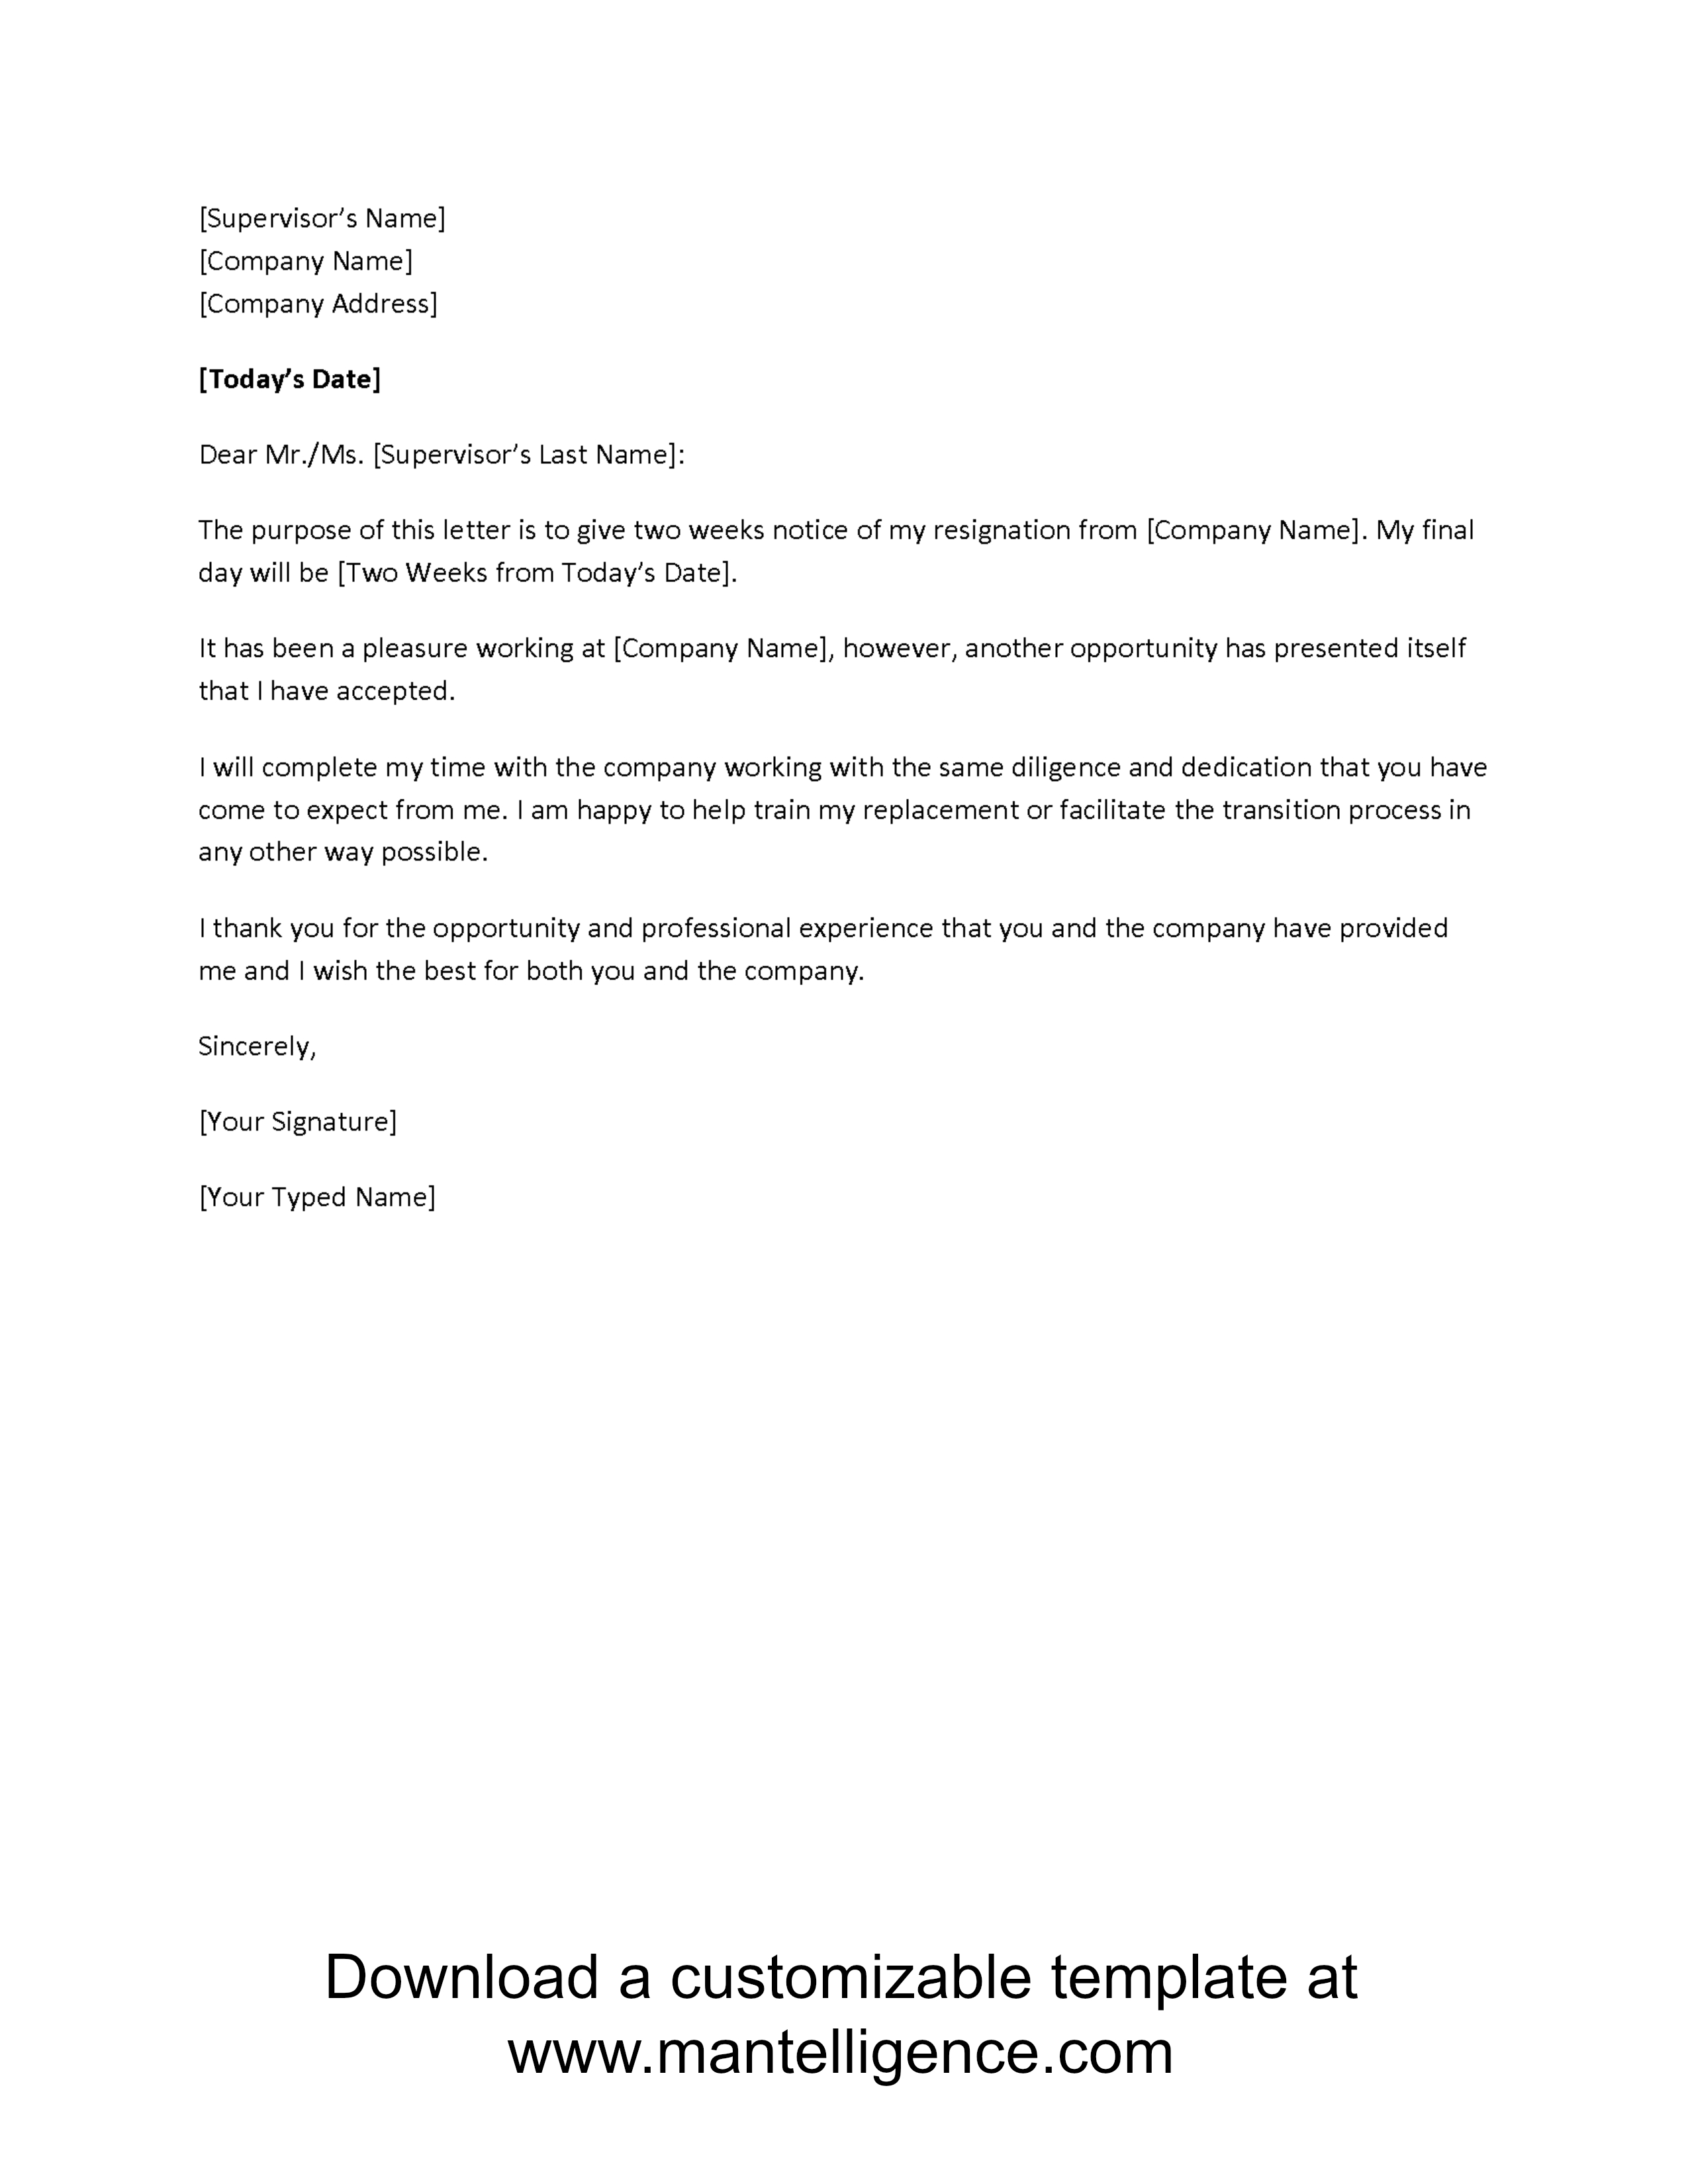 Notice to Vacate Letter Template - 3 Highly Professional Two Weeks Notice Letter Templates